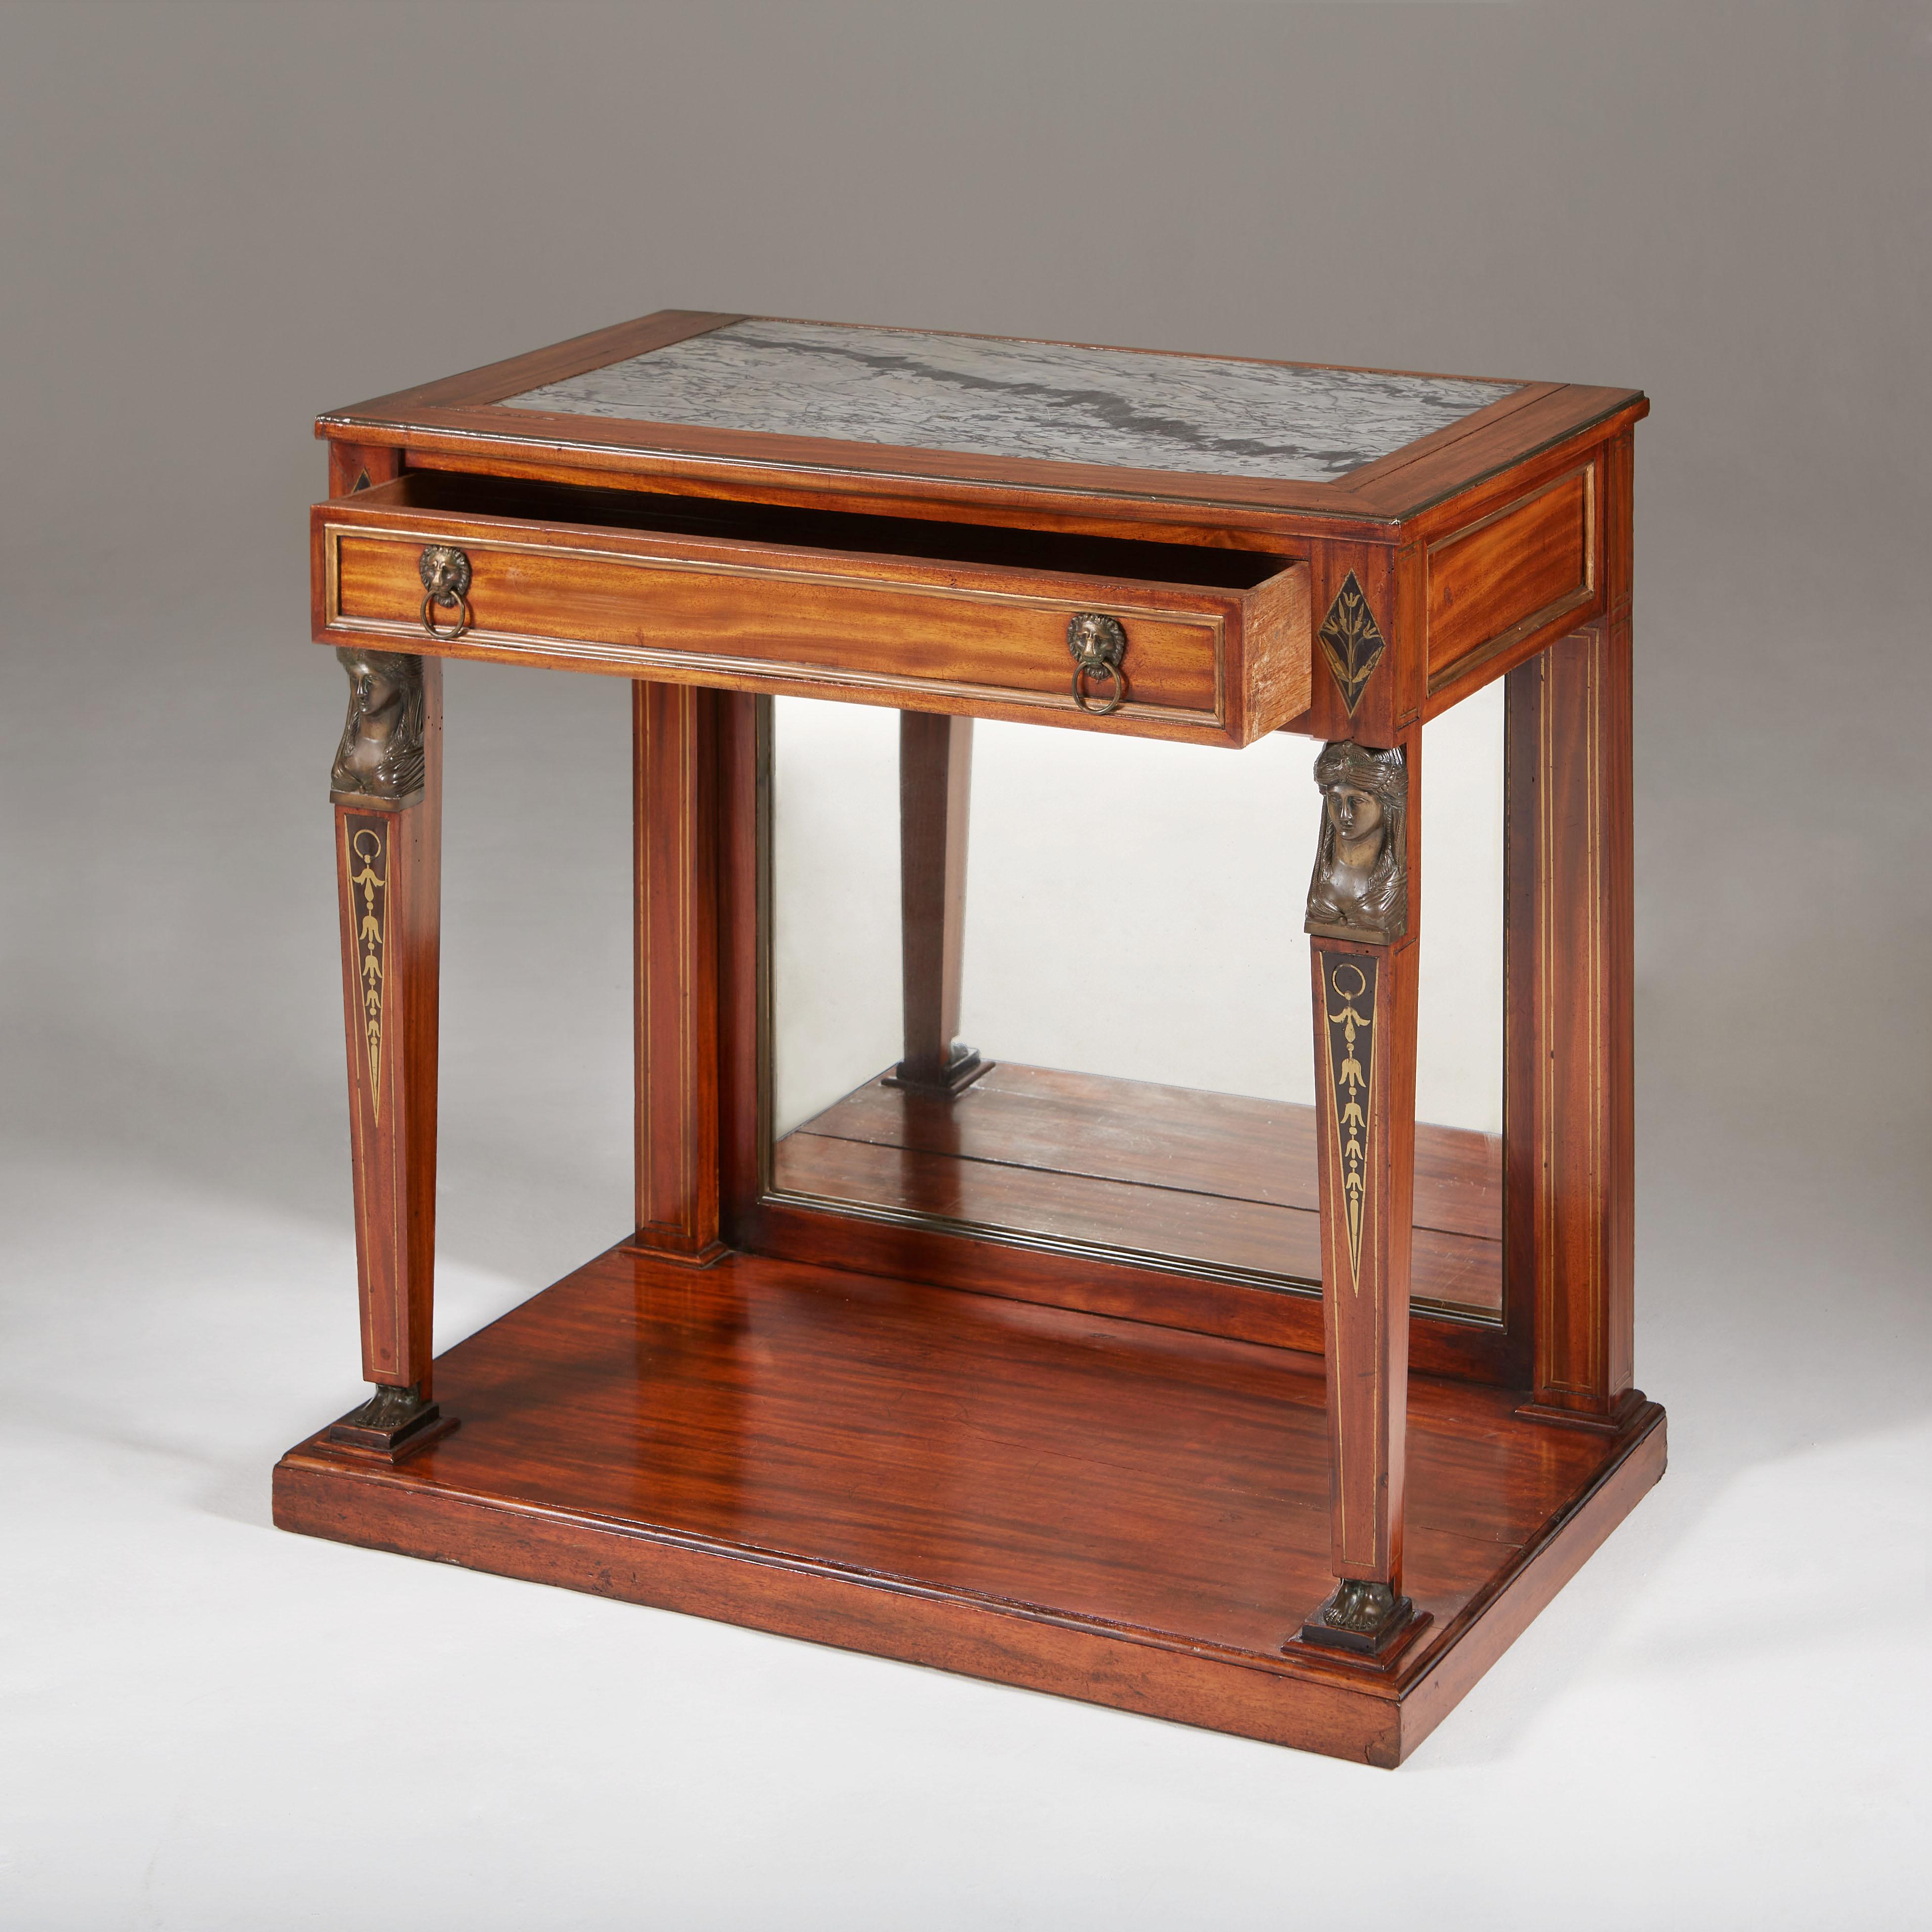 19th Century Empire Mahogany Console Table of Small Proportions with Grey Marble Top